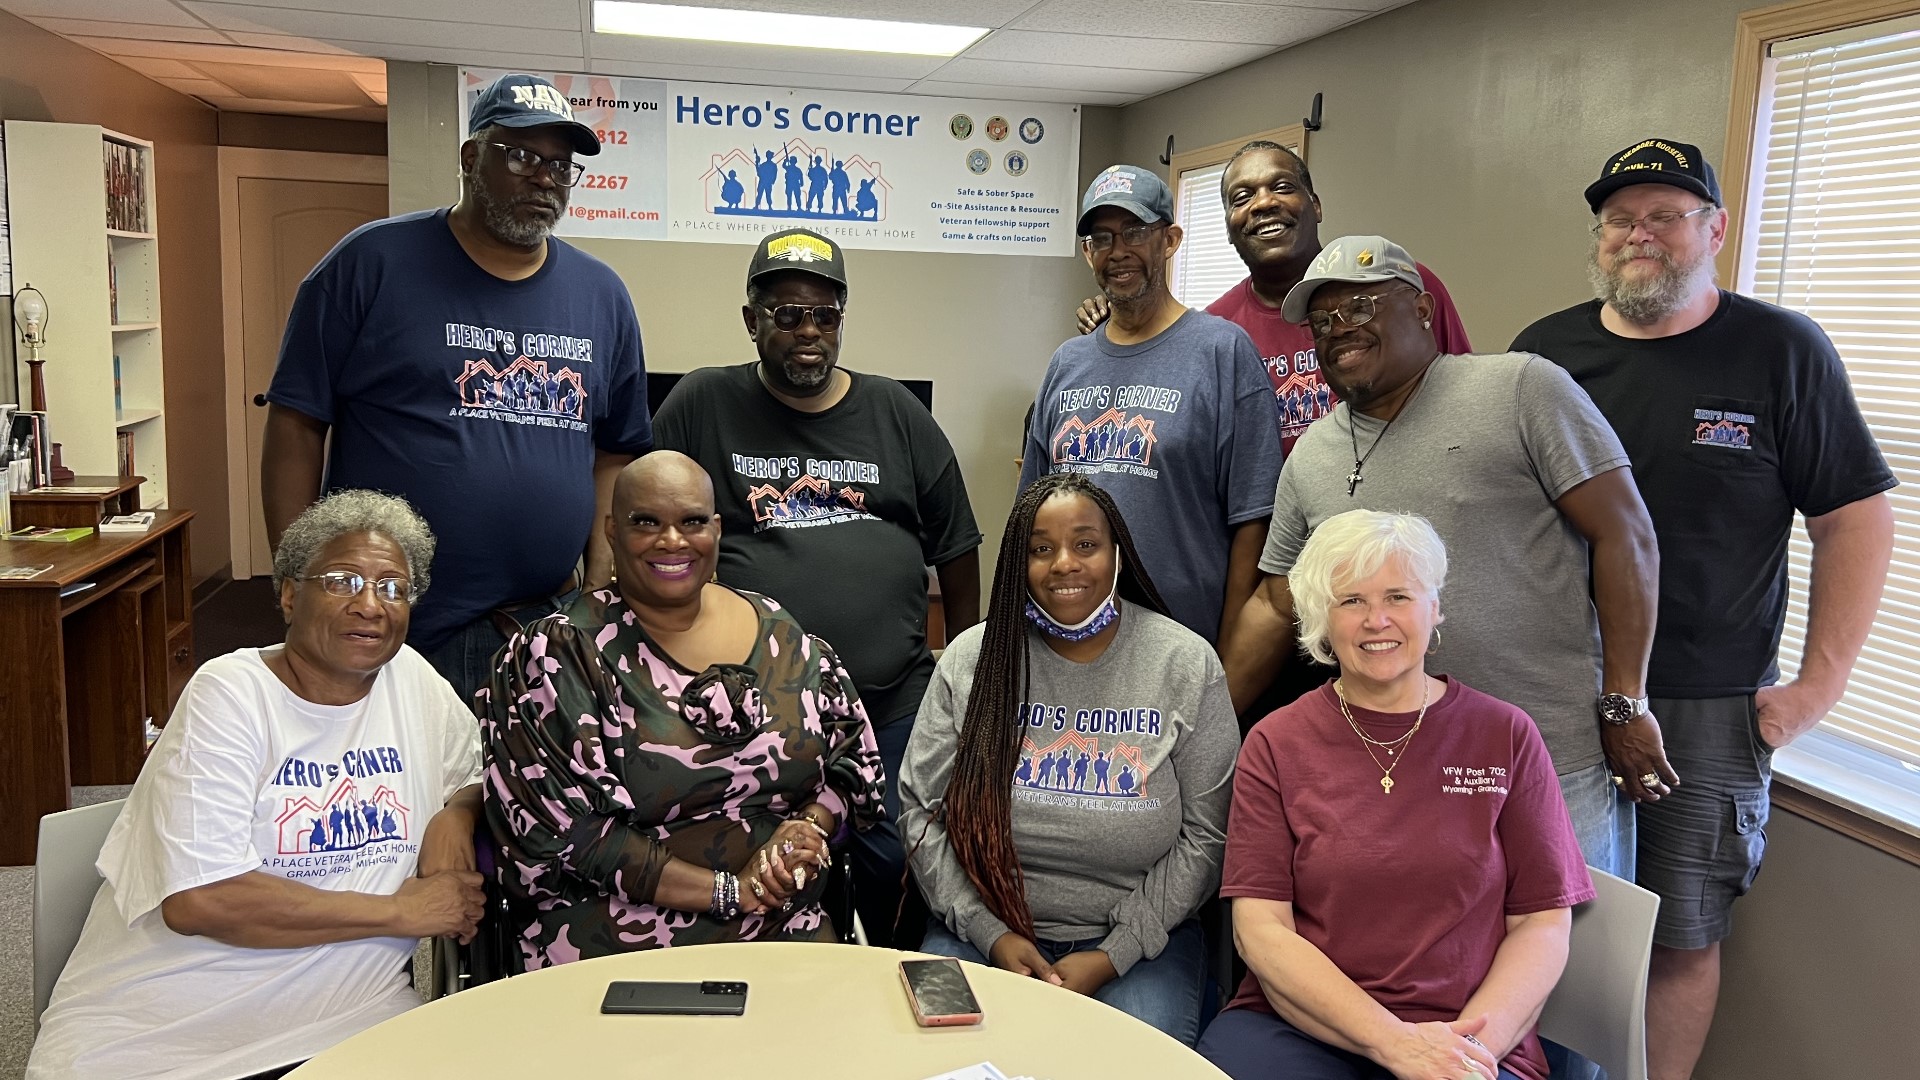 Hero's Corner held their first meeting in April at Marge's Donut Den in Wyoming. Since then, the drop-in center for veterans has found a place to call their own.